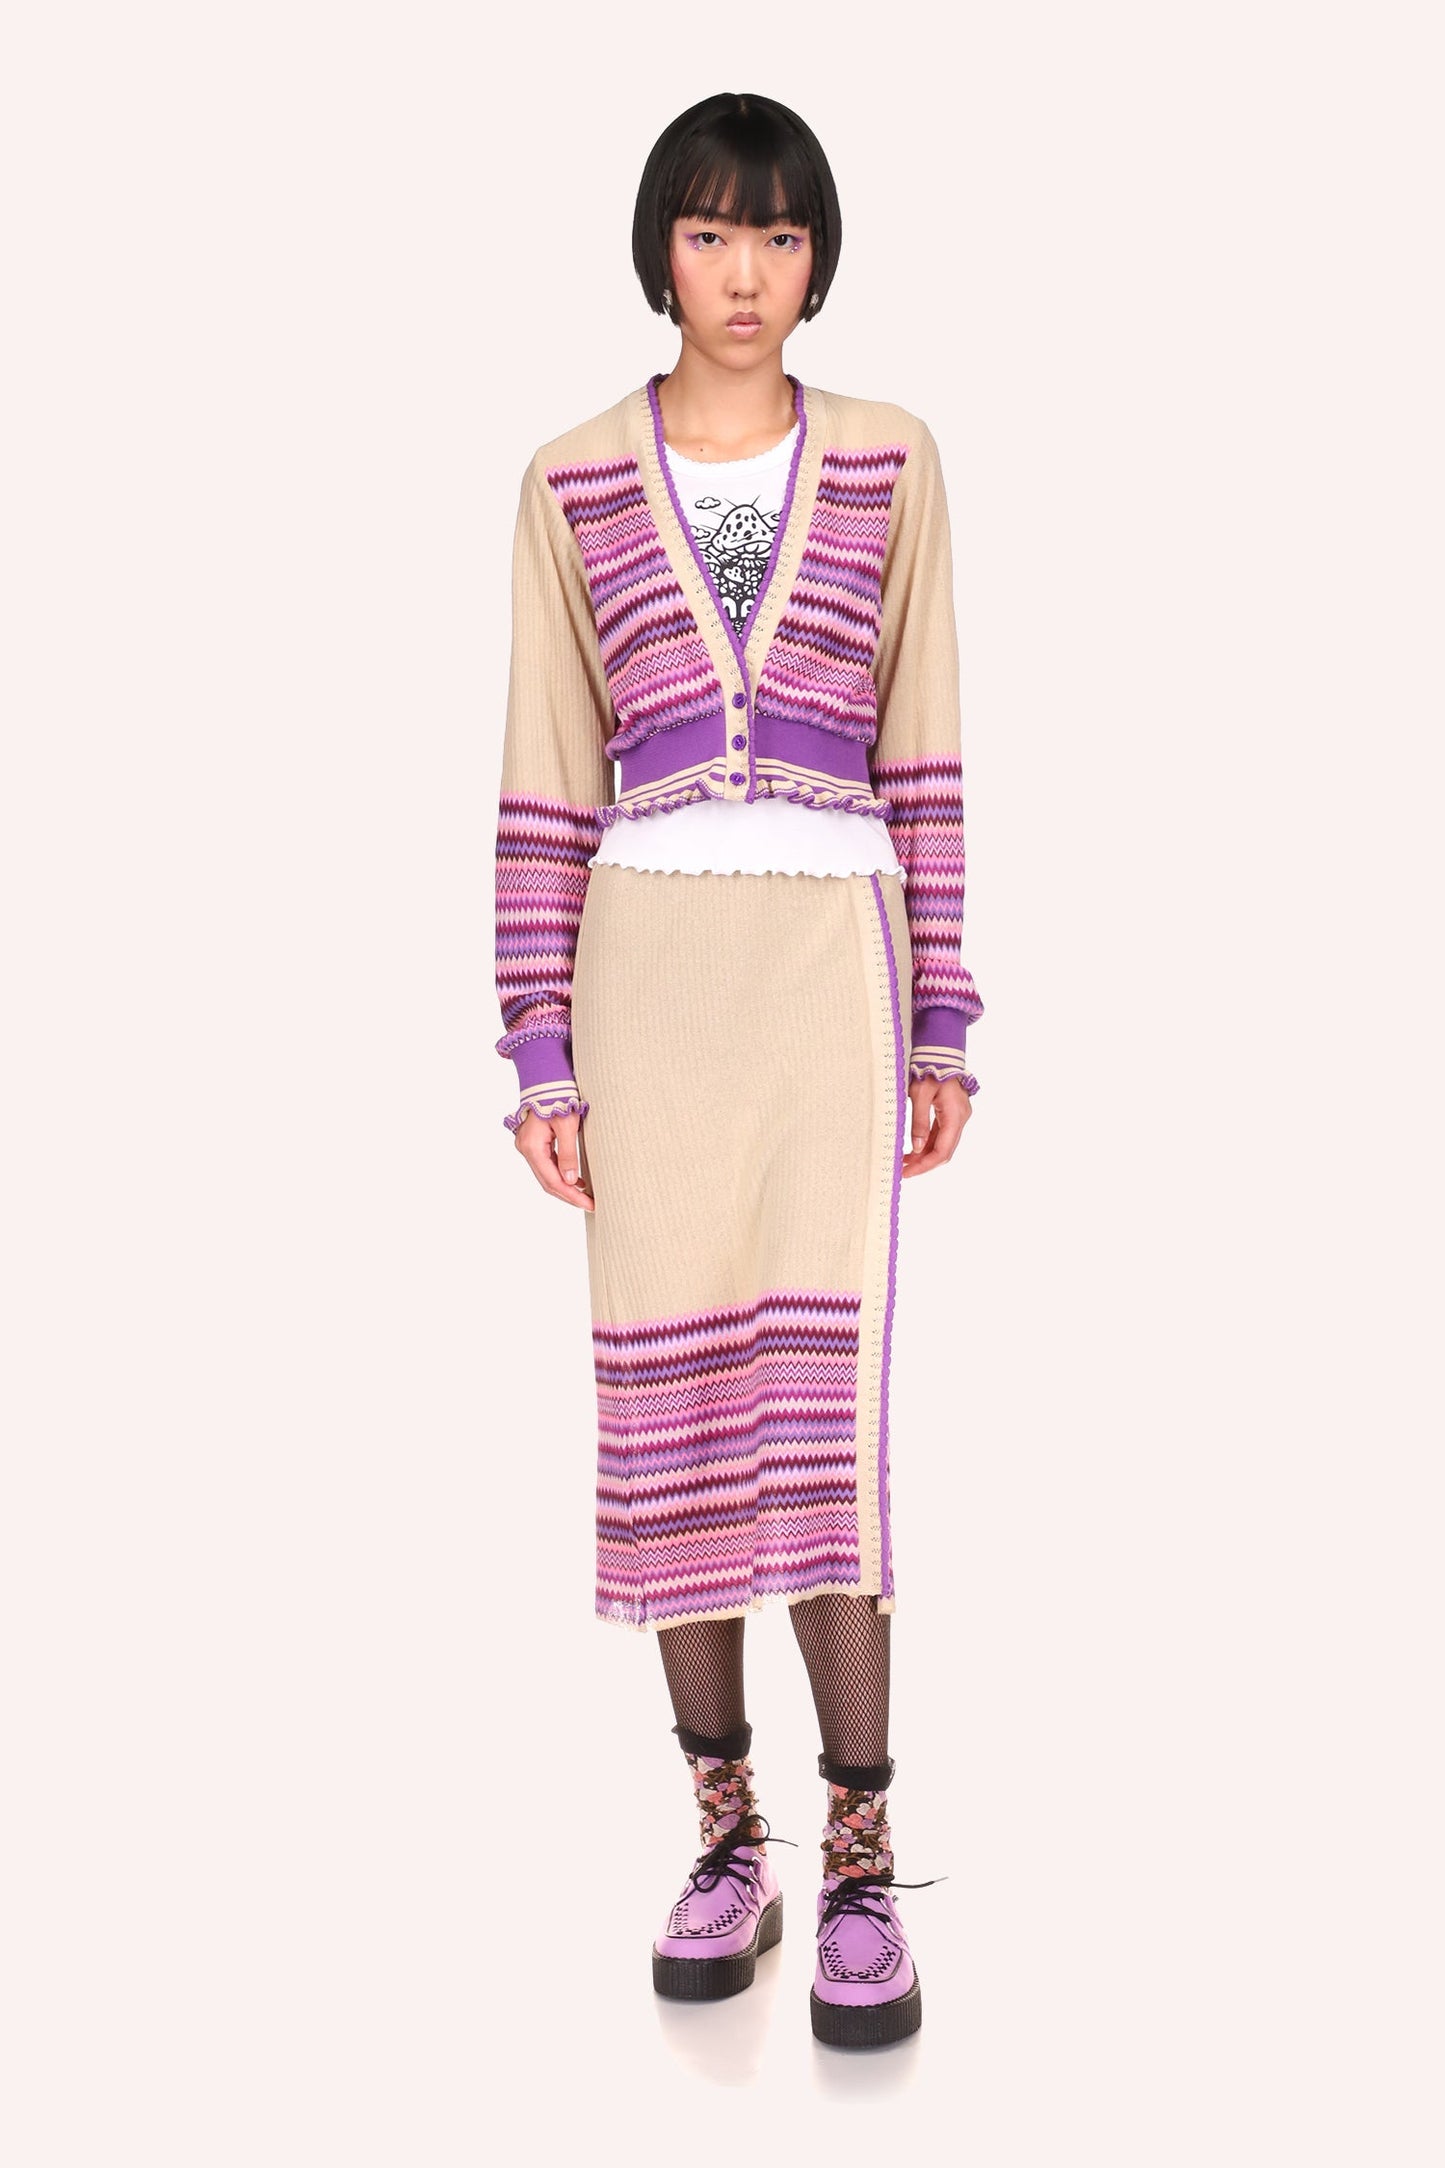 Tonal Zigzag Skirt lavender is a match for Tonal Zigzag Cropped Cardigan lavender